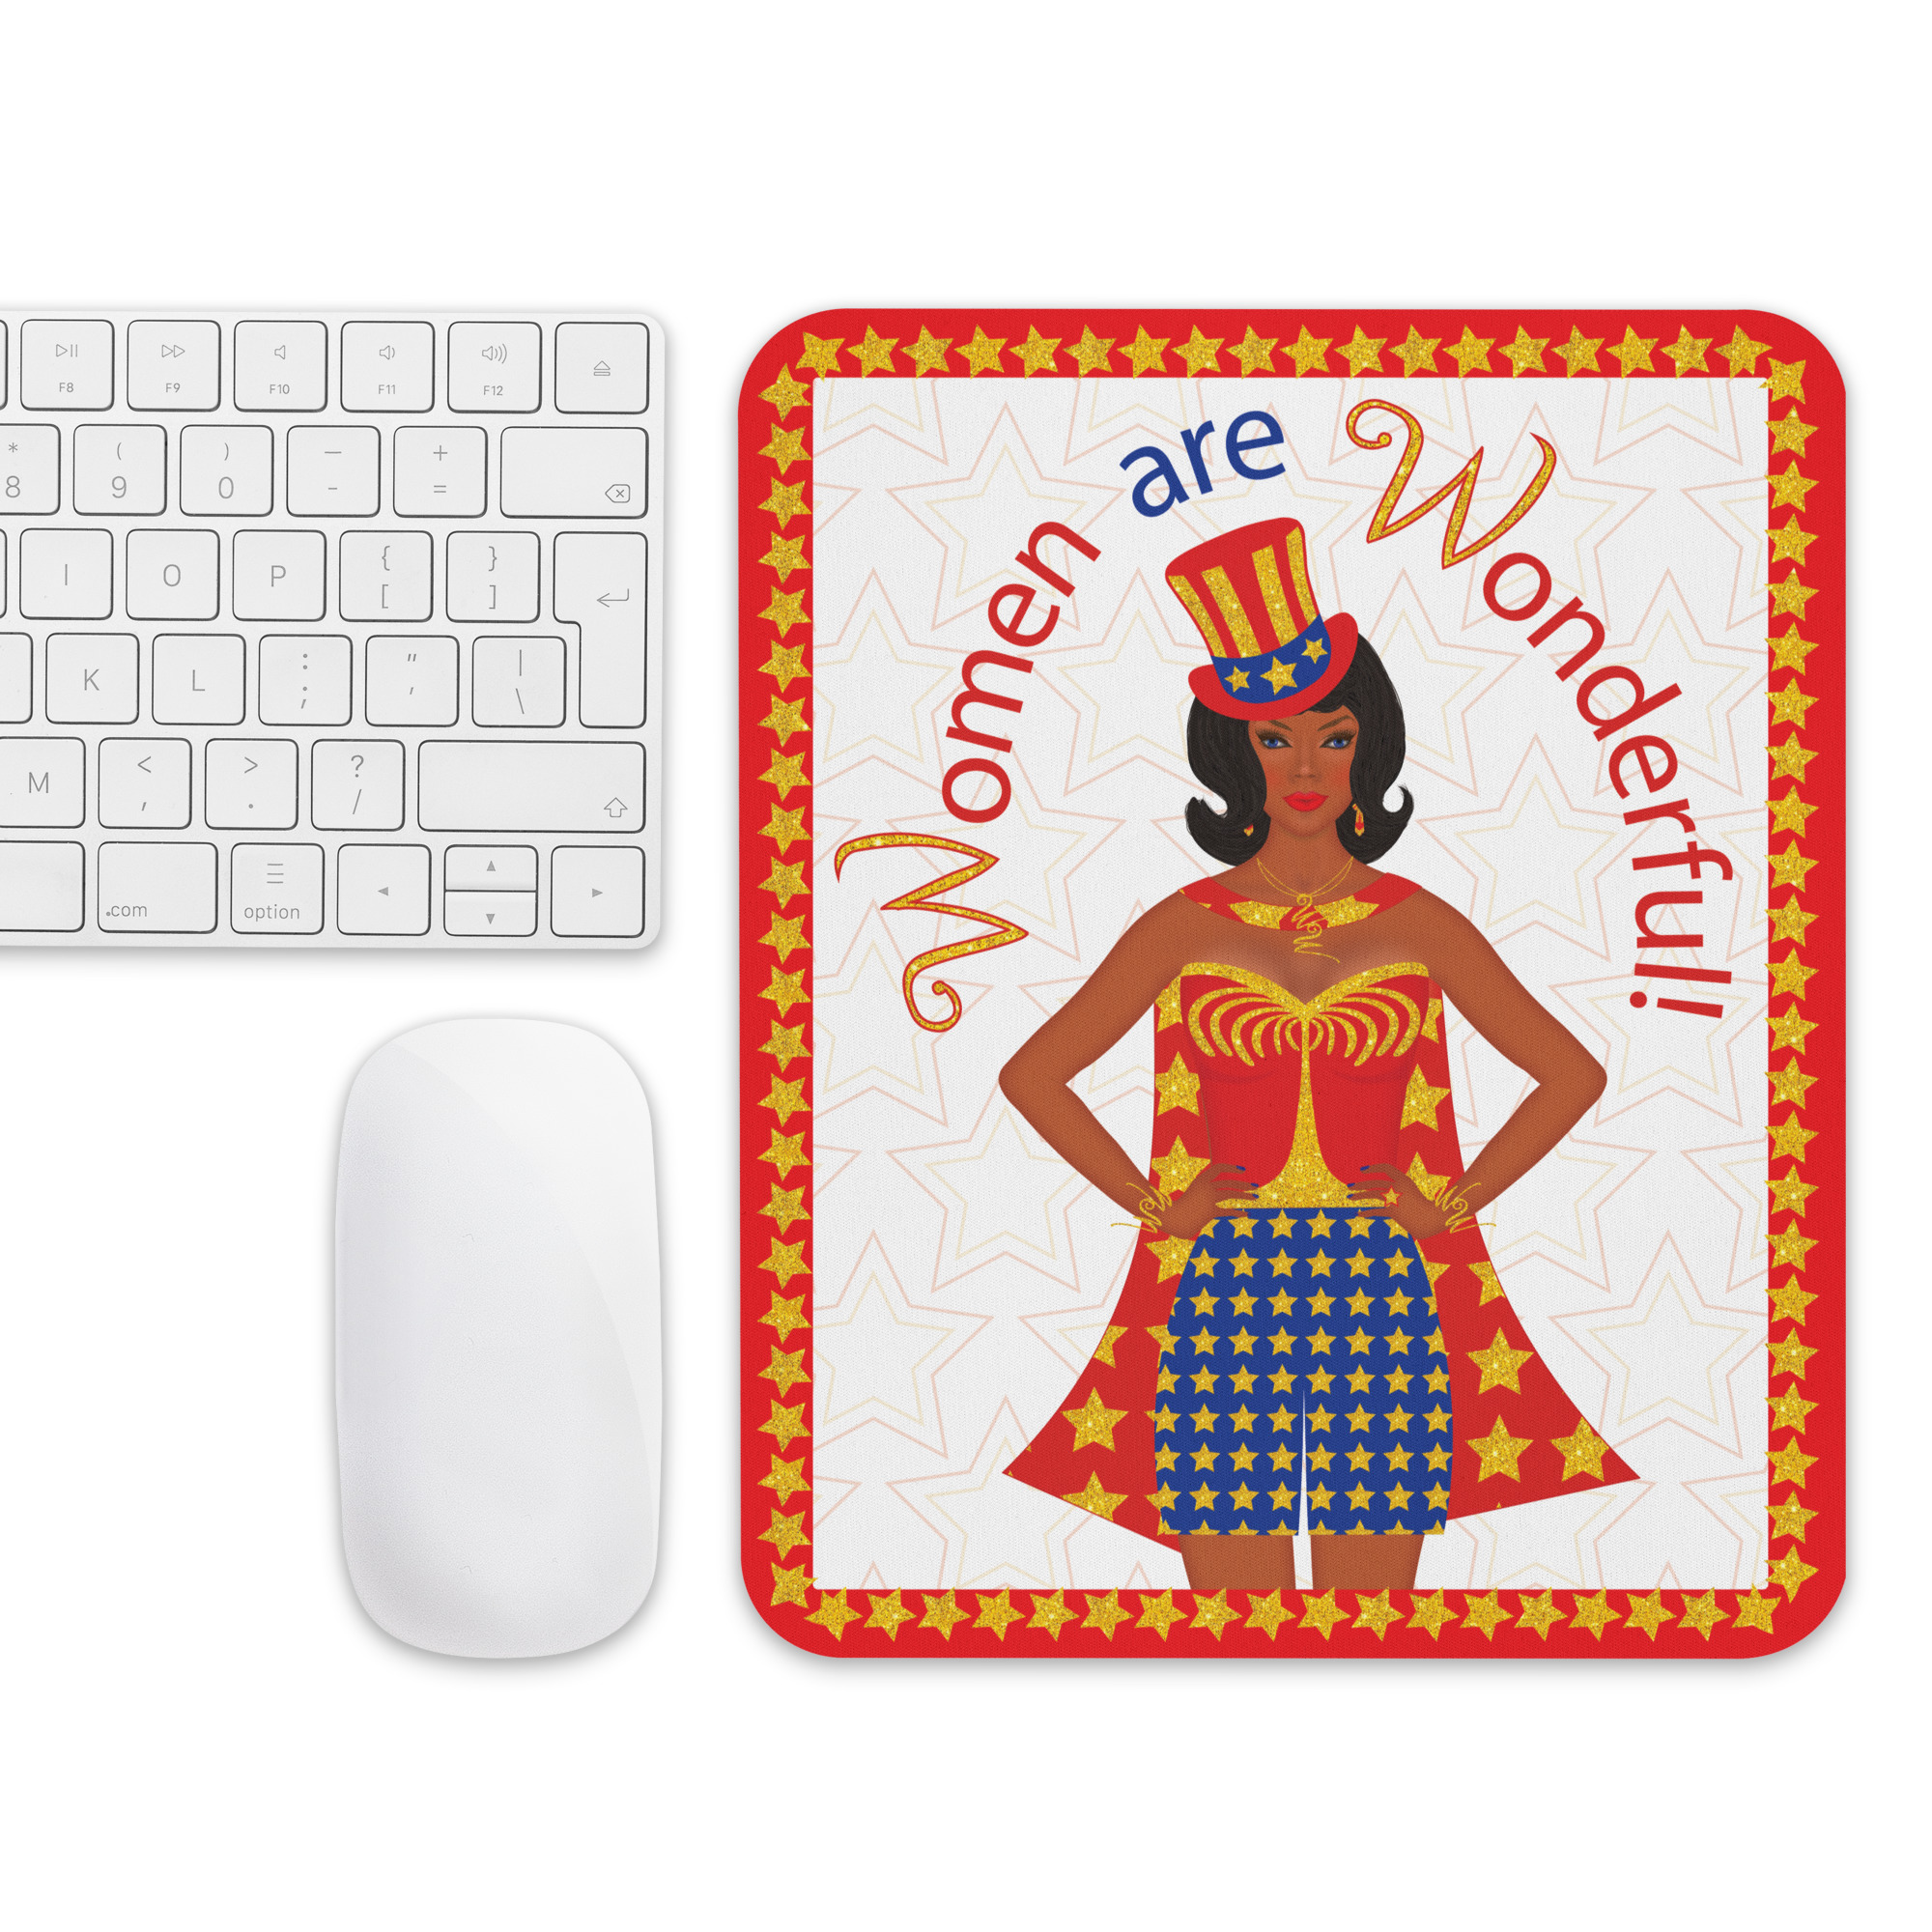 mouse-pad-white-front-639292a64f21a